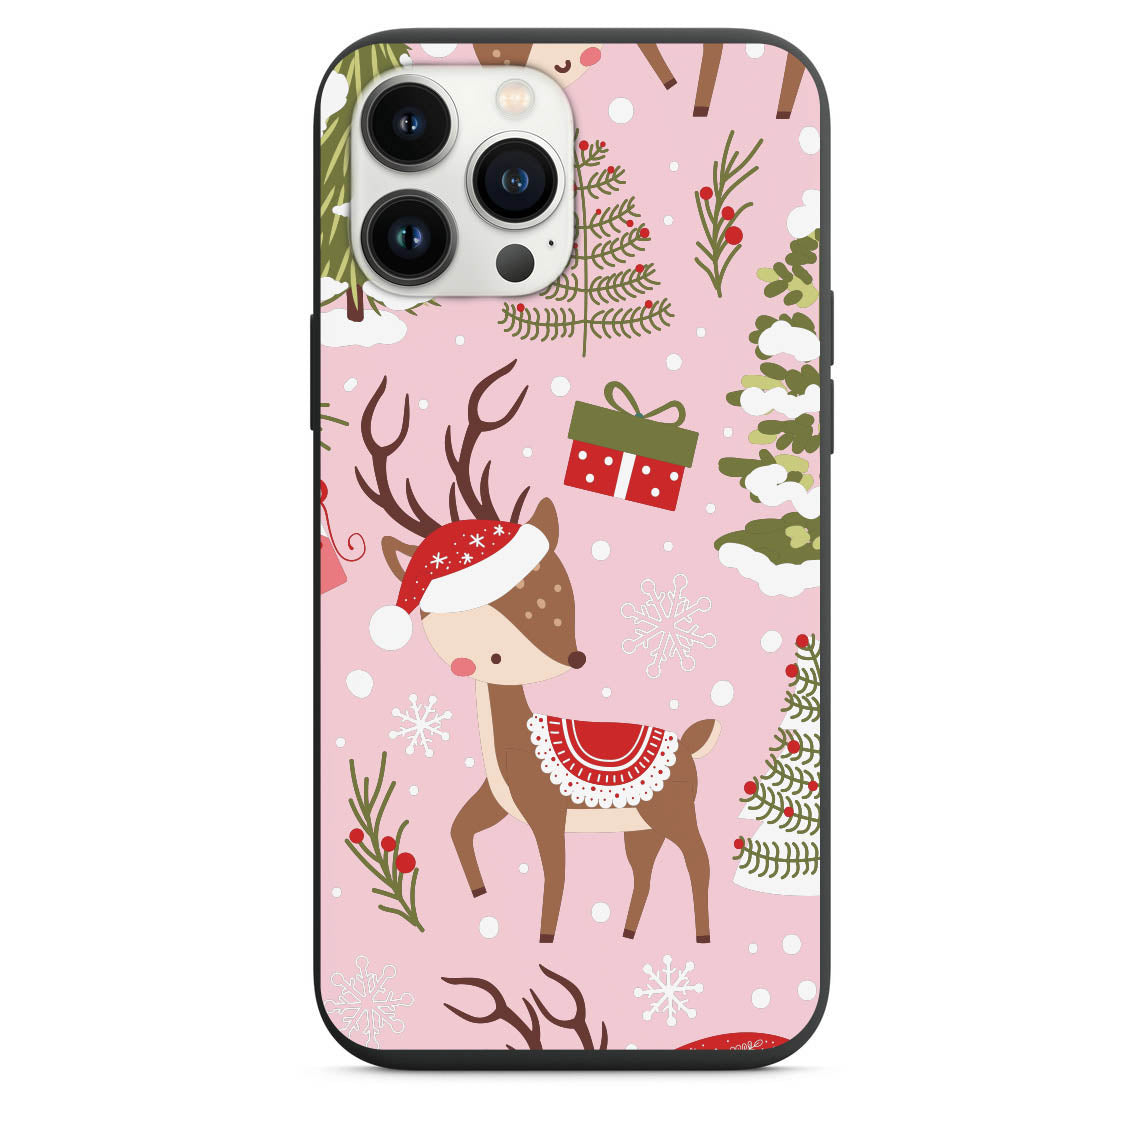 Cutest Reindeer With Santa Hat Phone Case for iPhone 7 8 X XS XR SE 11 12 13 14 Pro Max Mini Note s10 s10plus s20 s21 20plus